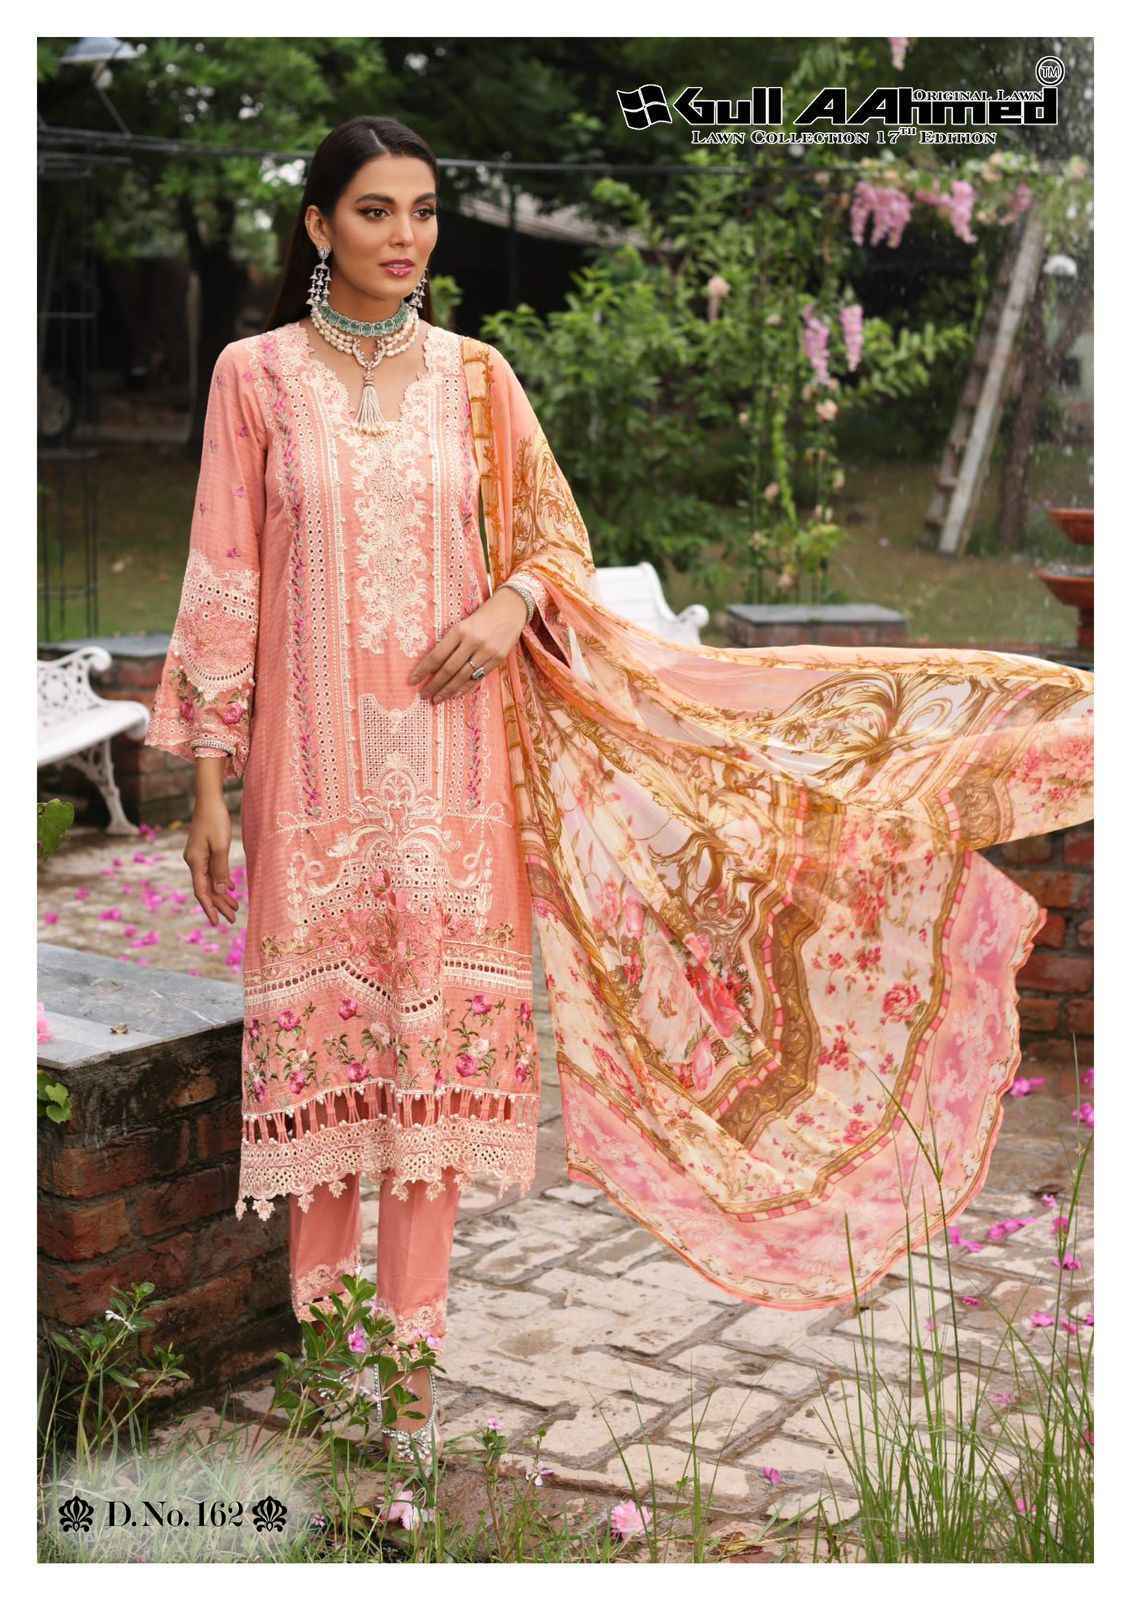 Gull Aahmed Lawn Collection Vol 17 Lawn Cotton Dress Material 6 pcs Catalogue